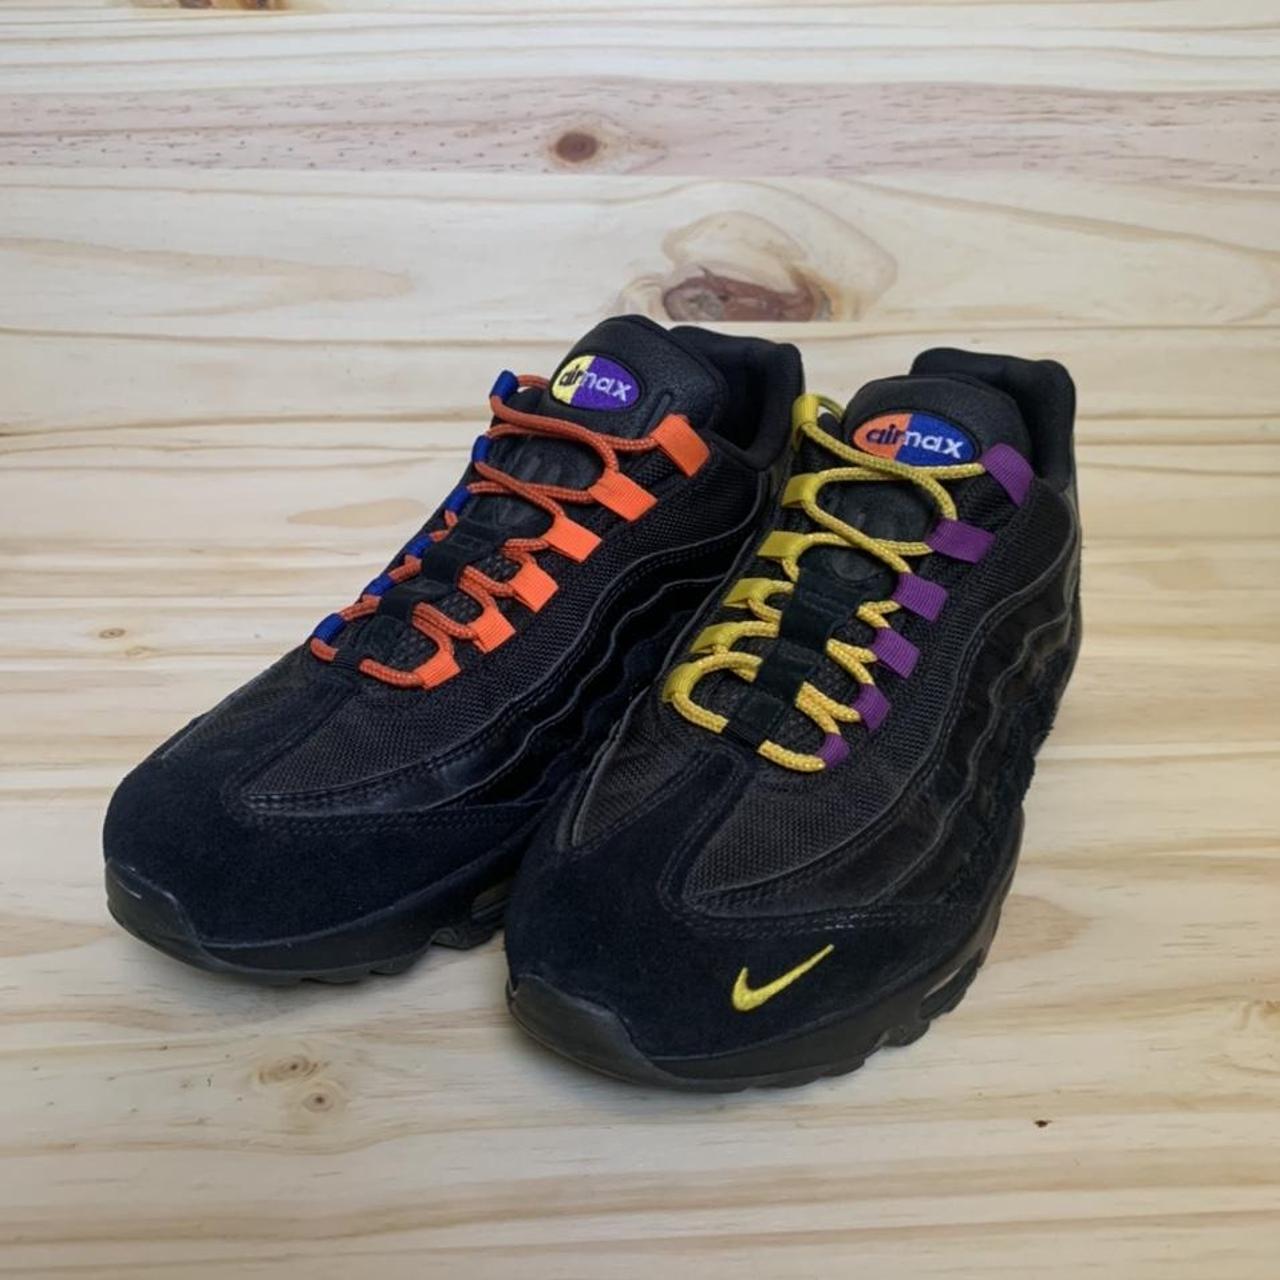 Nike Air Max 95 LA vs NYC. In really good condition....